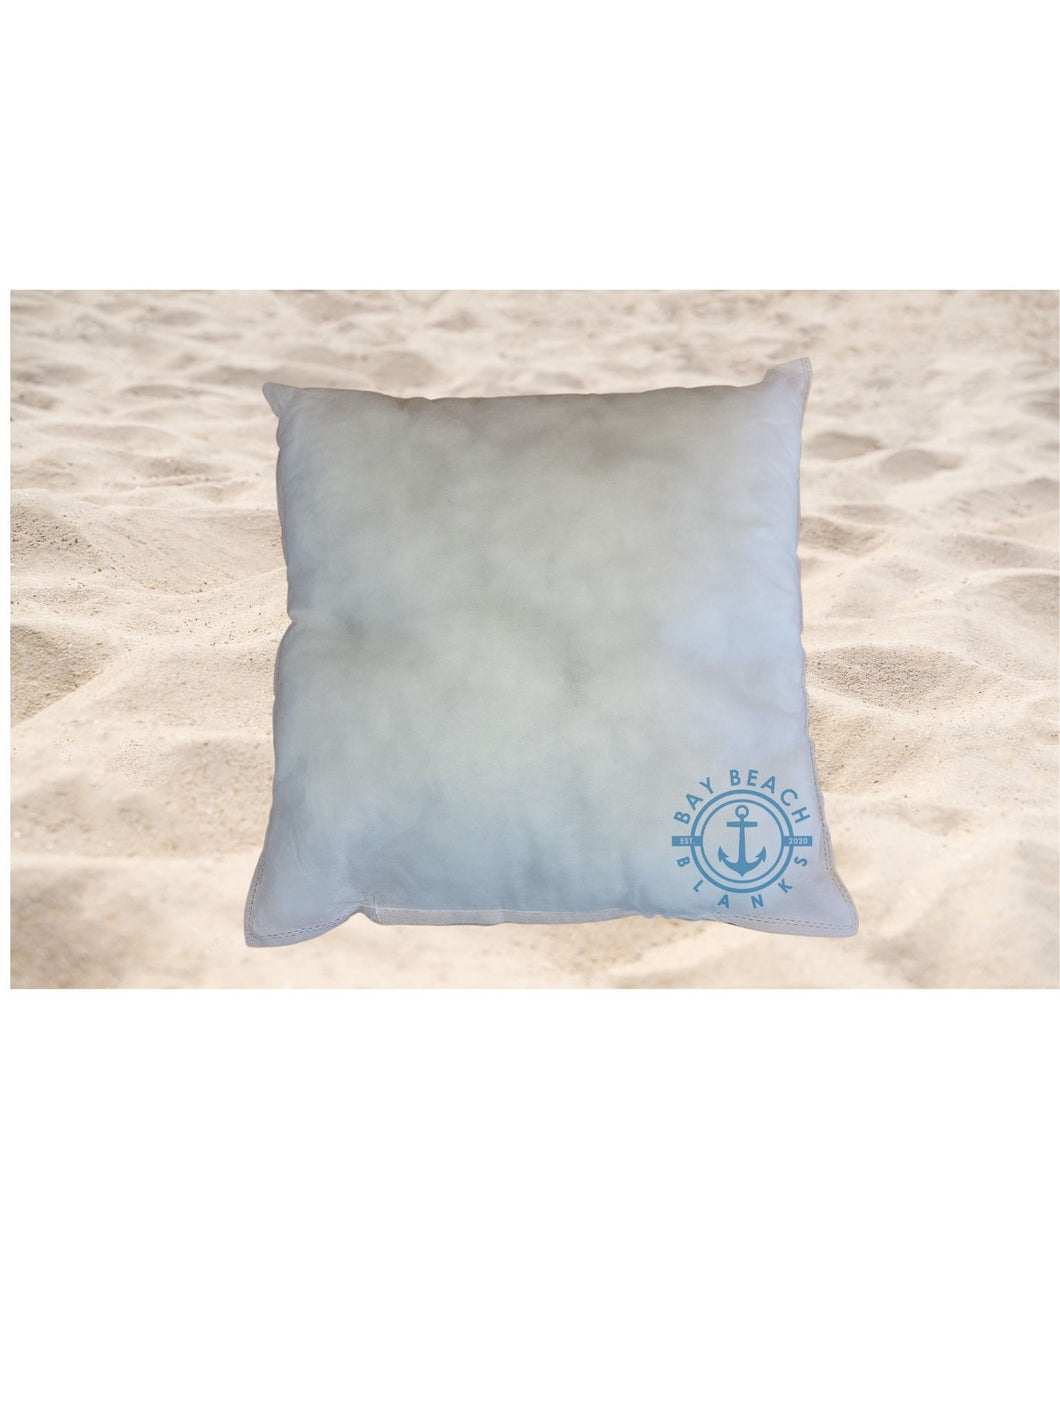 This 40 cm by 40 cm polyester filled pillow insert is available at Bay Beach Blanks. These can be machine washed and are the perfect size to fill the pillow cases after sublimation or vinyl is done to customize and personalize and make great gifts.